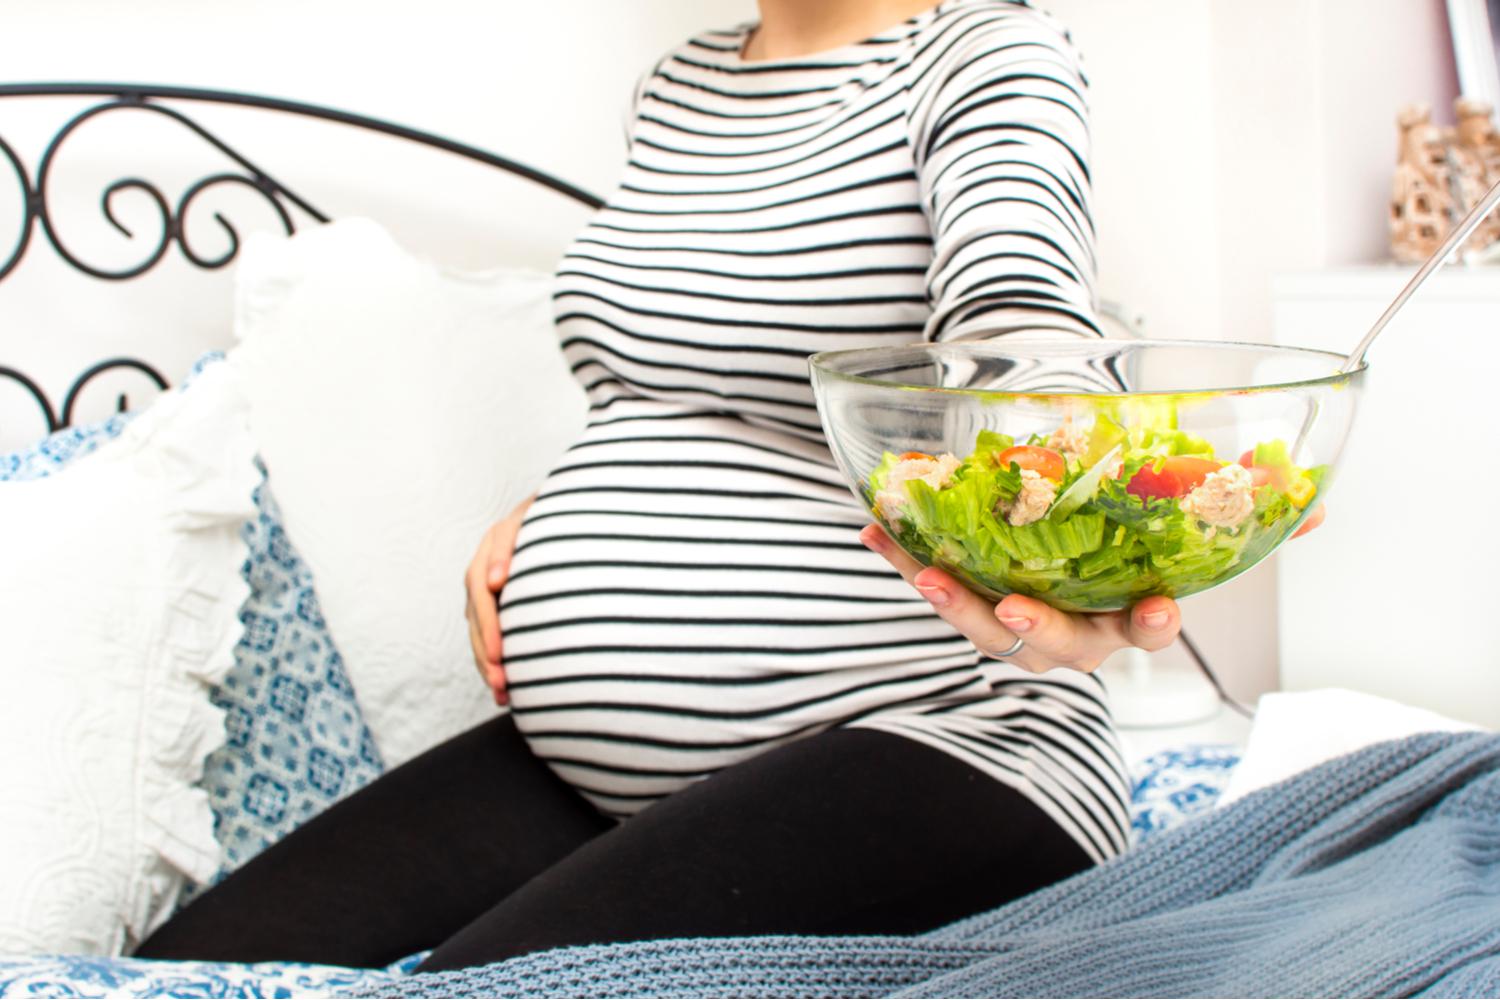 Benefits of eating tuna during pregnancy